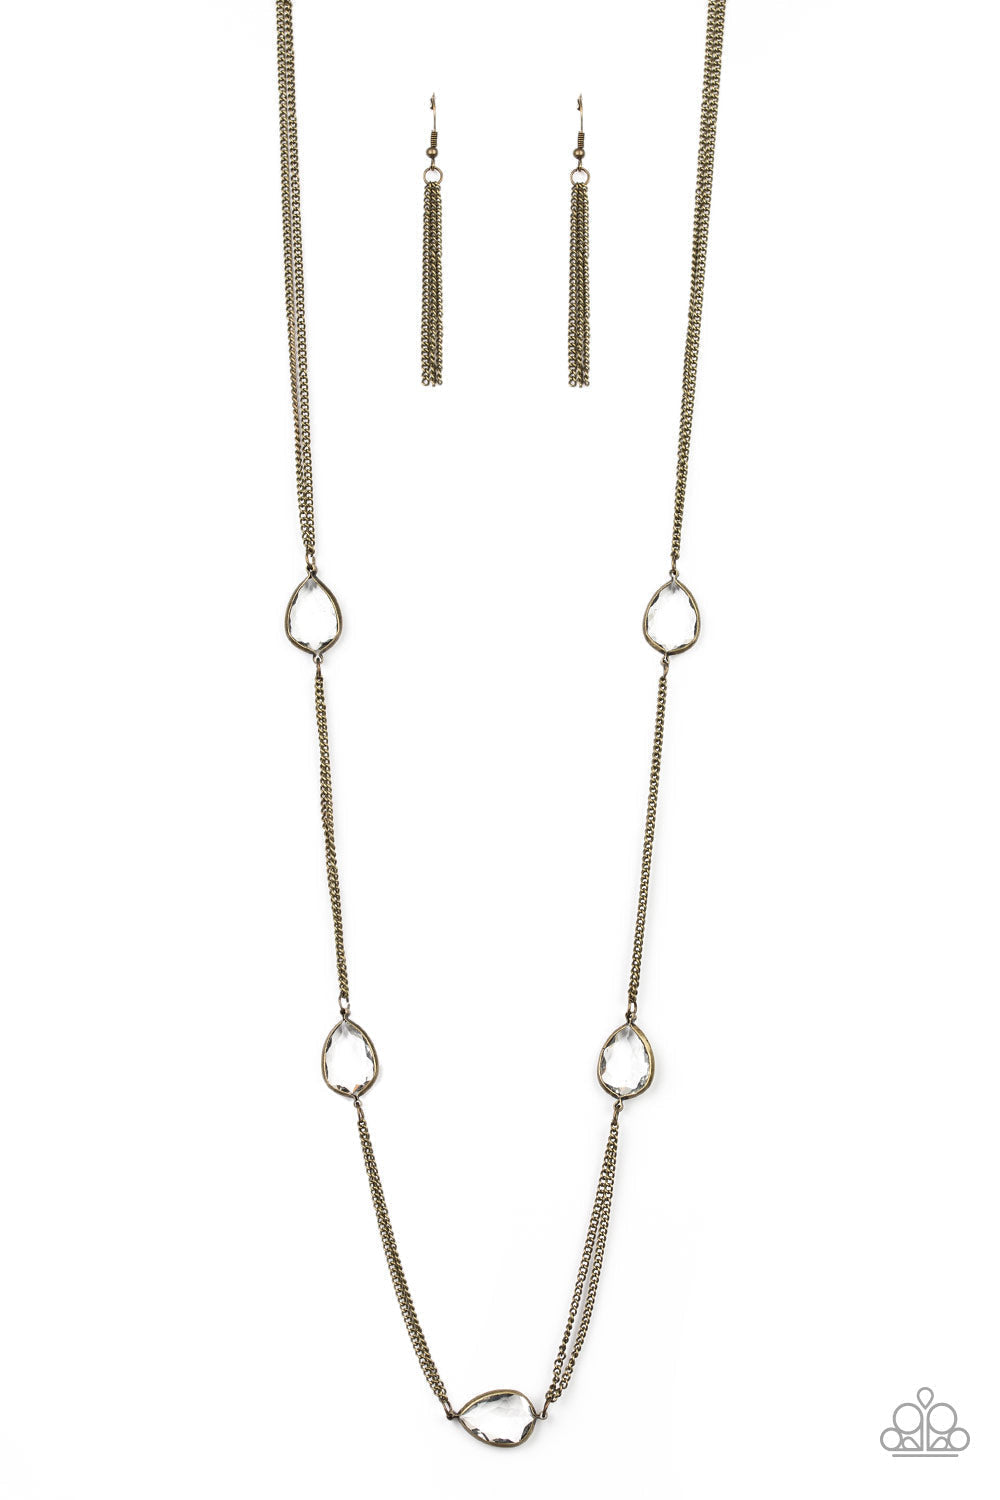 Teardrop Timelessness - Brass Necklace - Paparazzi Jewelry - Bejeweled Accessories By Kristie - Glassy white teardrops attach to sections of antiqued brass chain across the chest, creating a refined display. Features an adjustable clasp closure. Sold as one individual necklace.